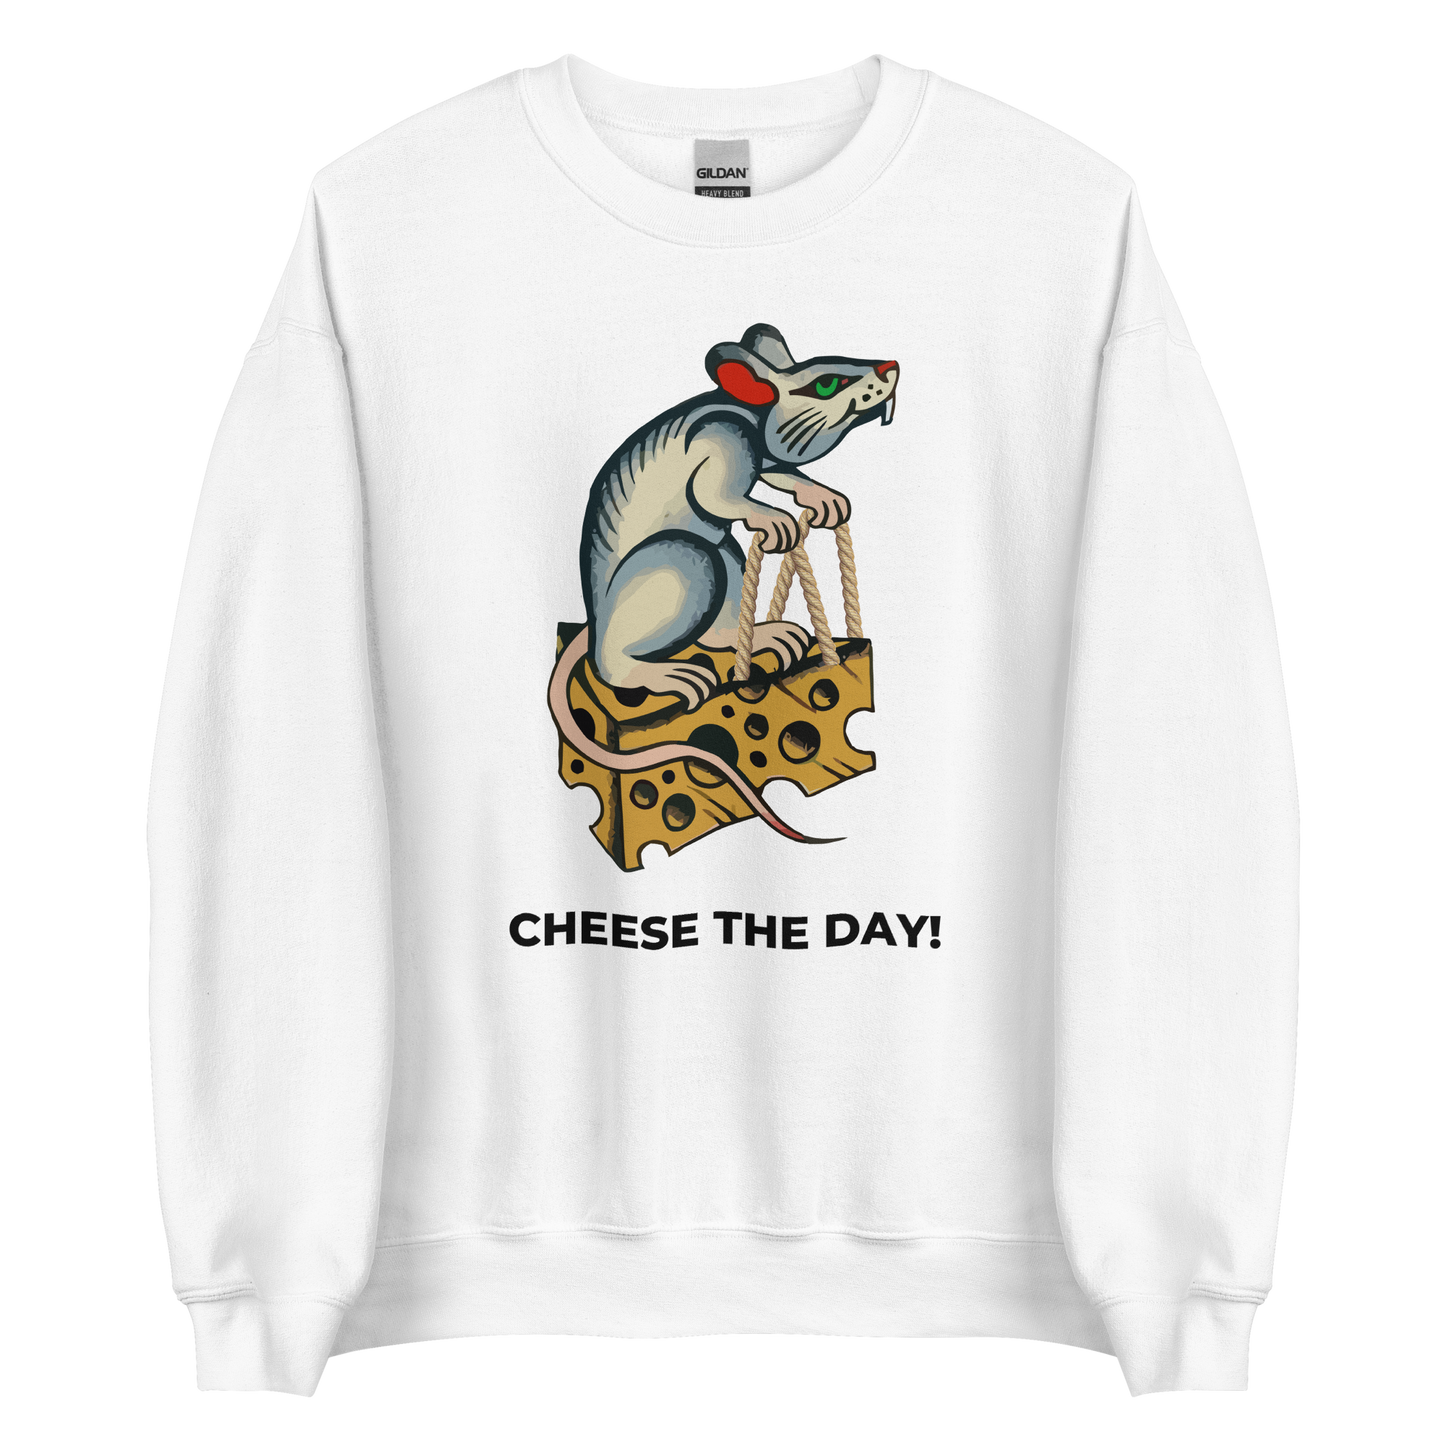 White Rat Sweatshirt featuring a hilarious Cheese The Day graphic on the chest - Funny Graphic Rat Sweatshirts - Boozy Fox